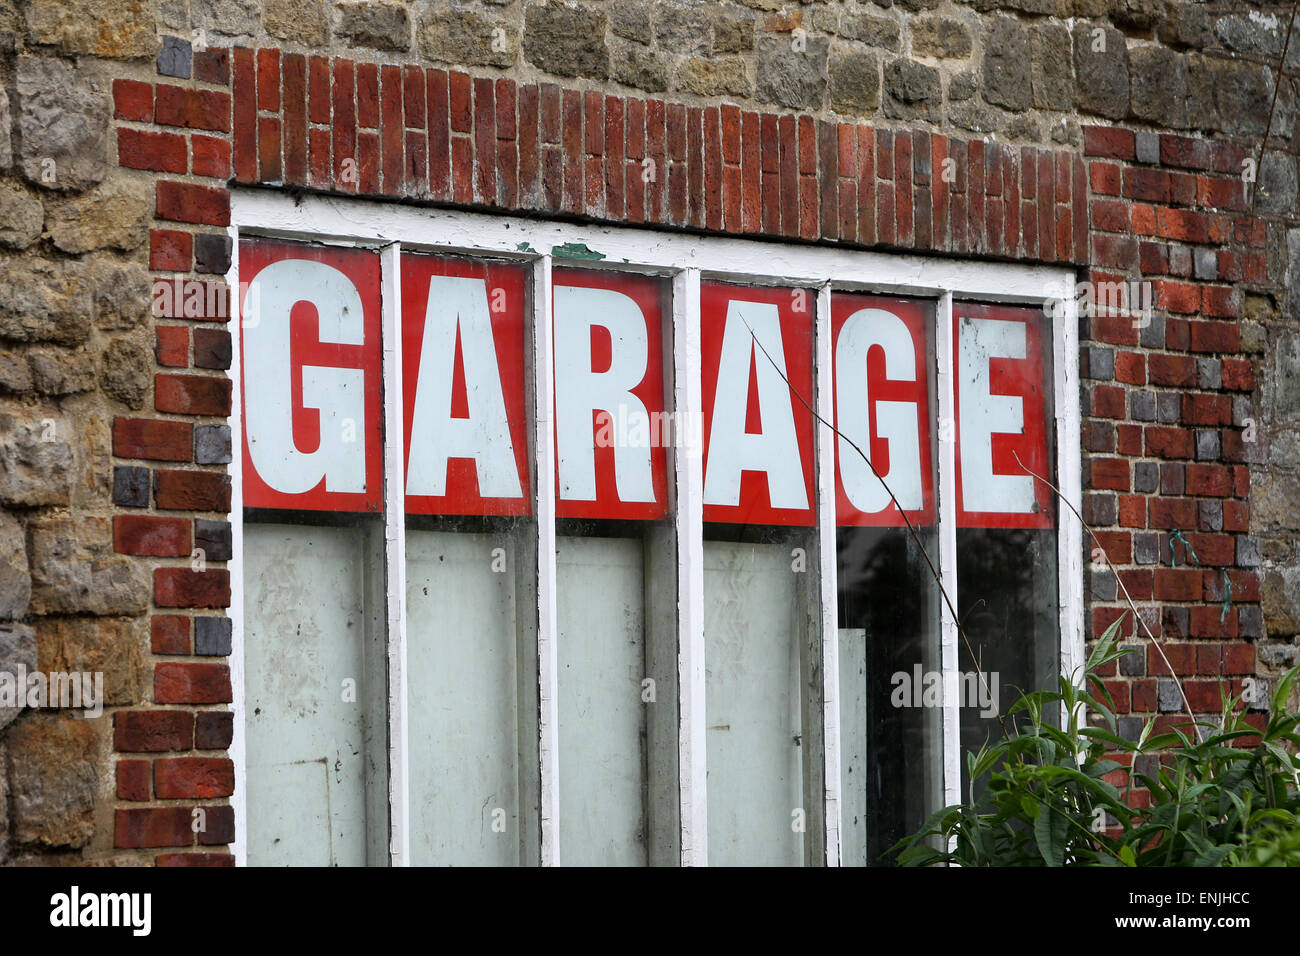 Old fashioned car garage sign in Petworth, West Sussex, UK. Stock Photo